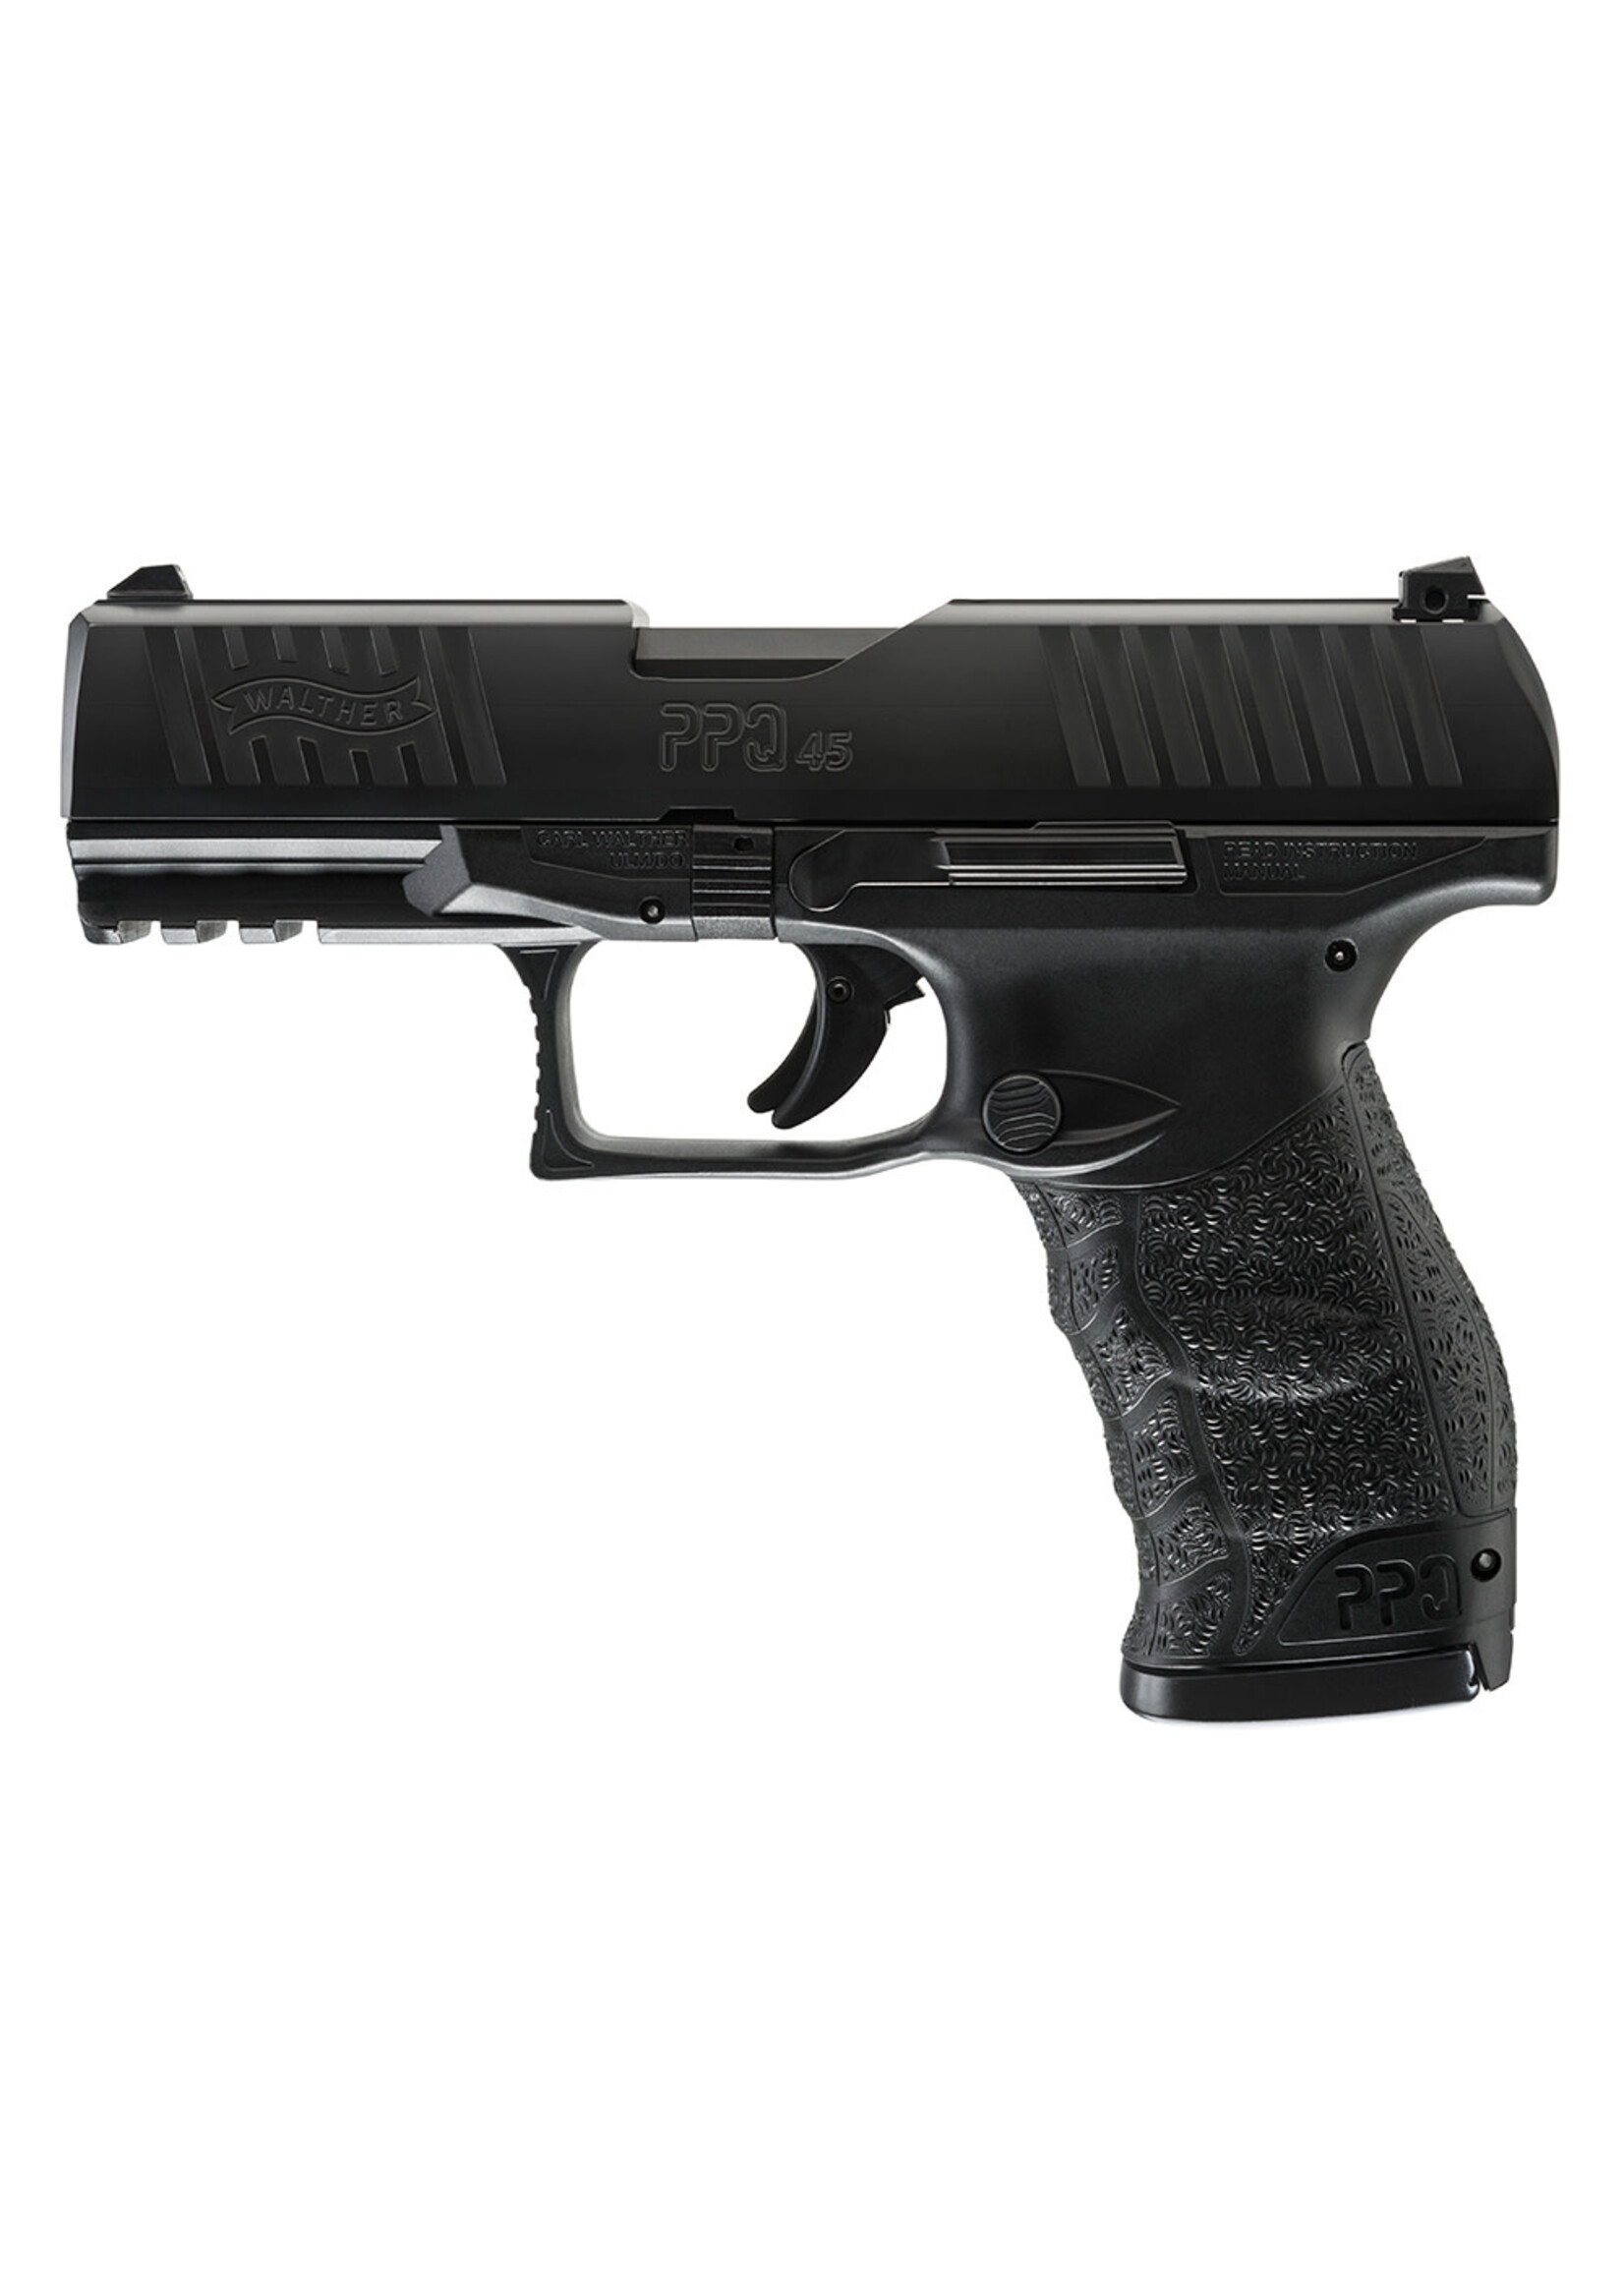 Walther Walther Arms 2807076 PPQ M2 45 ACP 12+1 4.25" Barrel, Polymer Frame With Picatinny Acc. Rail, Ambidextrous Slide Stop, Reversible Button-Style Magazine Release, Manual Safety